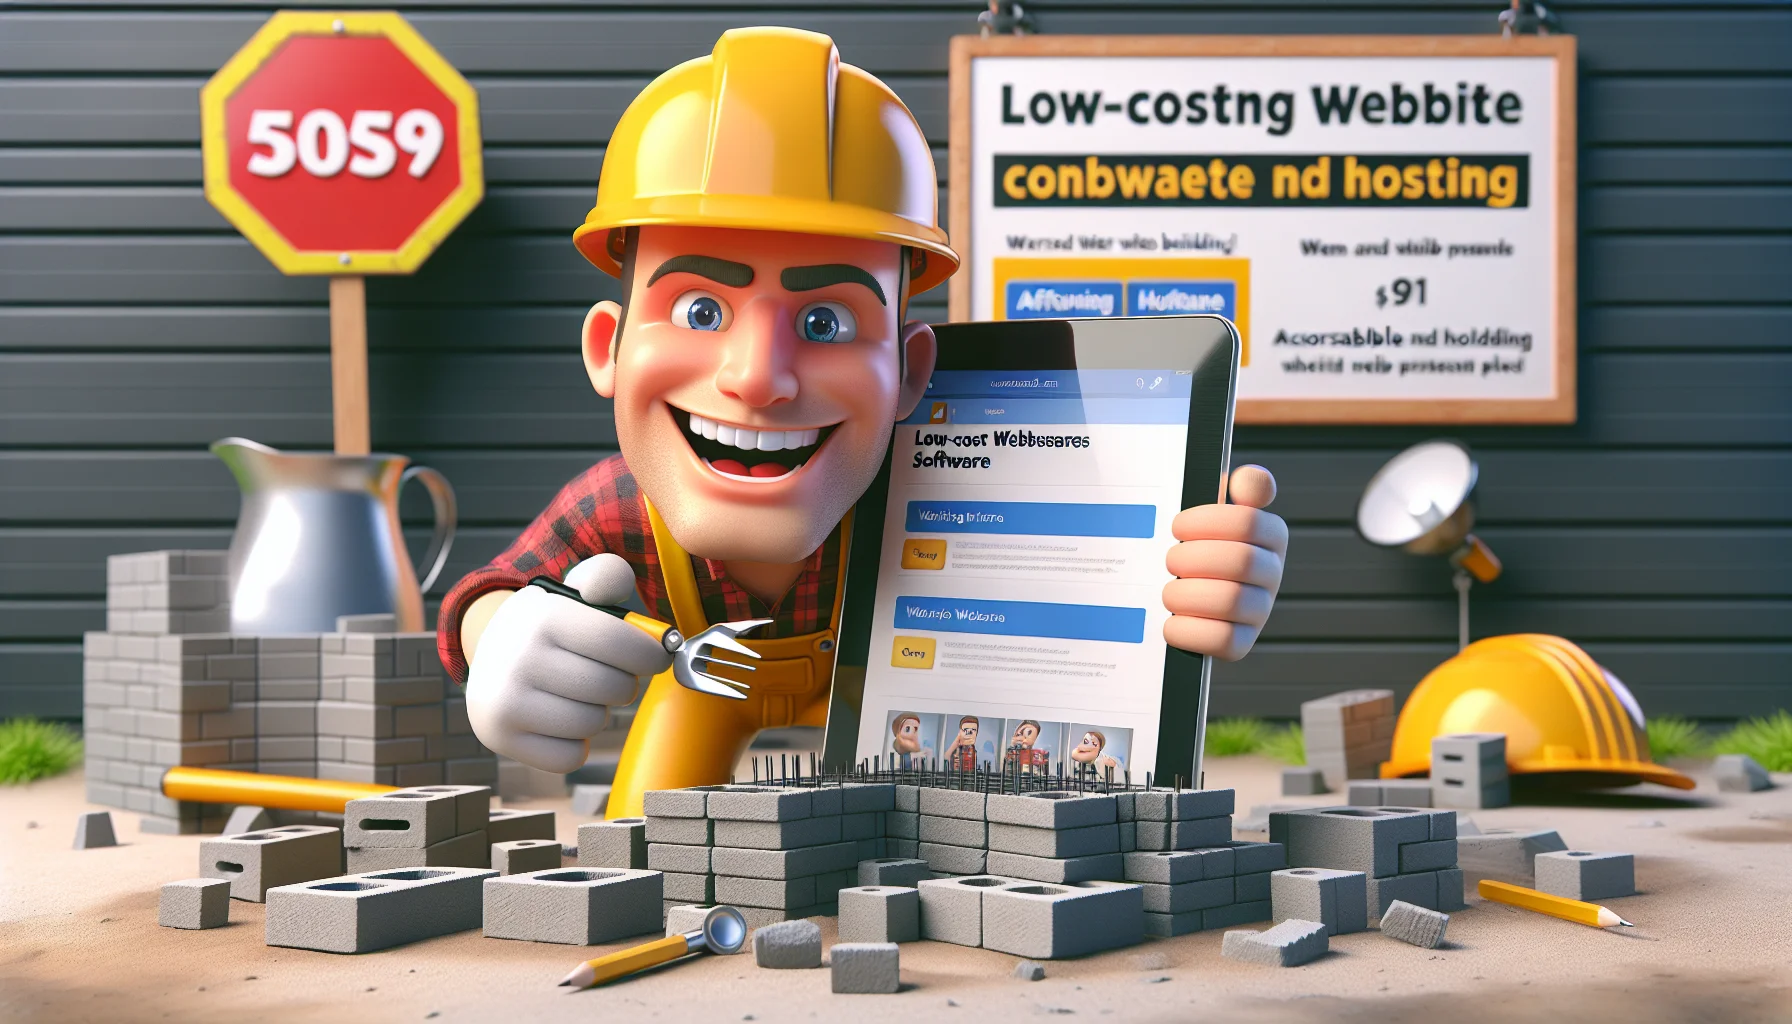 Create a humorous scene involving a low-cost website creation software designed like a character. This character, portrayed as a Caucasian male construction worker, is remarkably building webpages using his tools on a digital tablet screen instead of traditional cement and bricks. He's wearing a bright yellow construction helmet, with a wide, friendly smile, providing an enticing atmosphere. In the background, there's a signboard promoting affordable web hosting plans. The scene is vibrant with bright colors and cartoonish charm, emphasizing the accessible and affordable nature of website building and hosting.